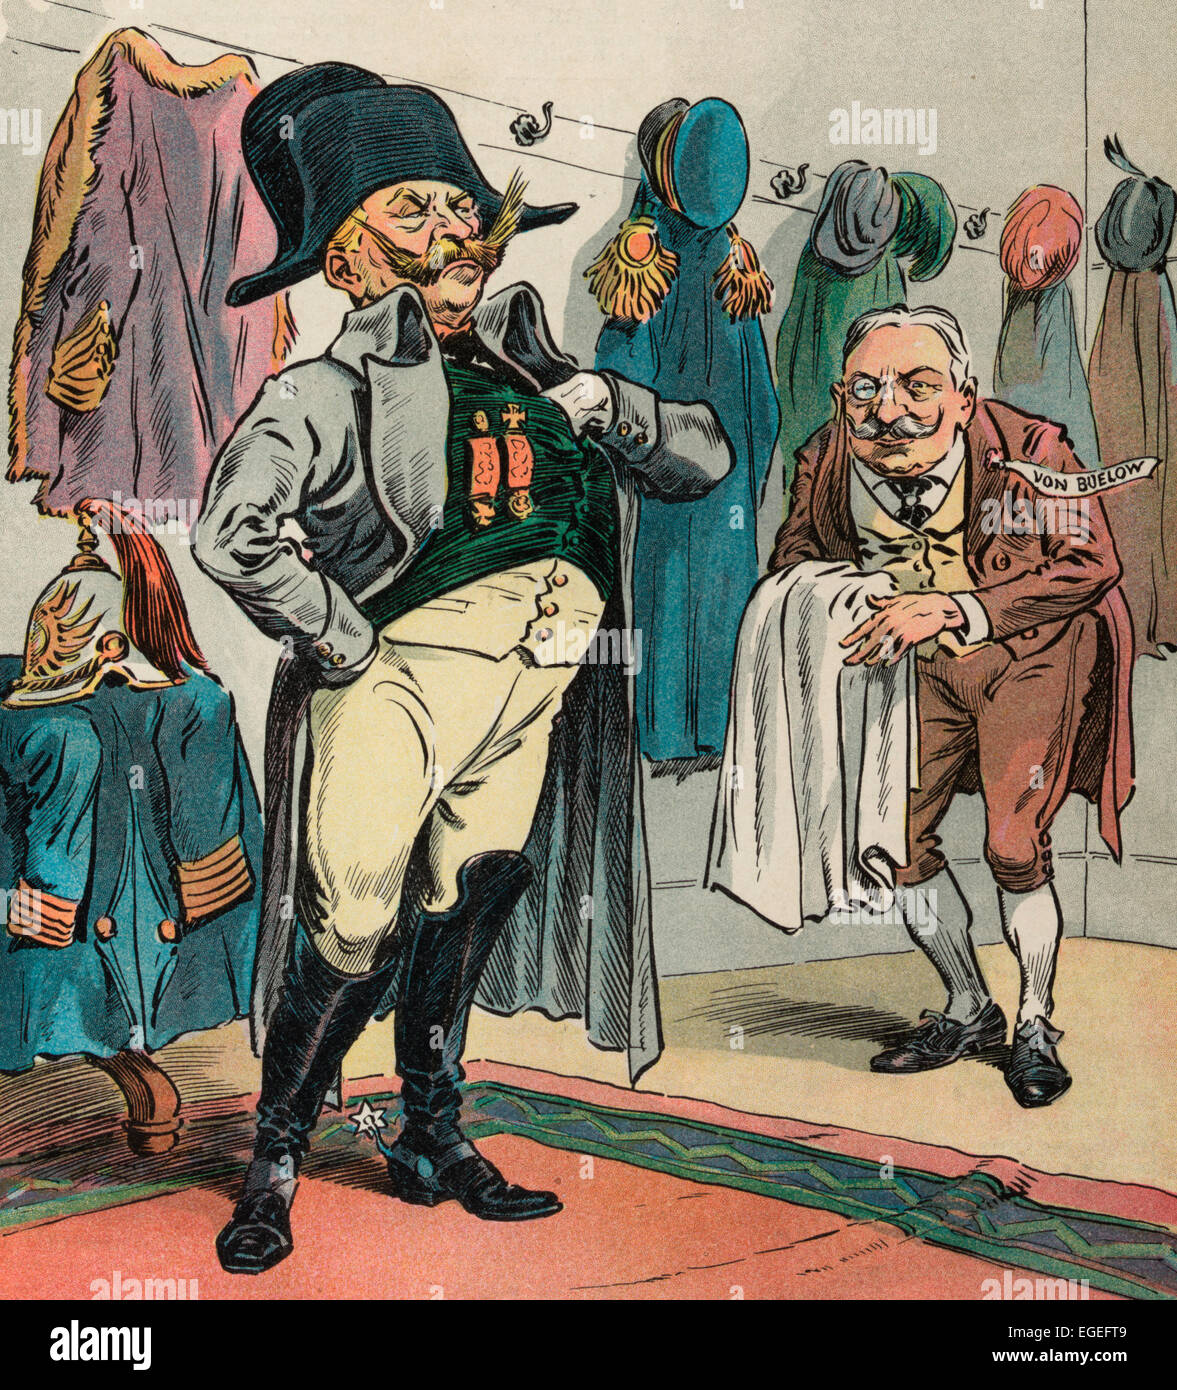 The Ready made Napoleon. William II, emperor of Germany, exchanging his coat and helmet for a hat and coat in the style of Napoleon I, emperor of the French; Bernhard von Bülow stands next to him, also dressed in the style of an early 19th century French aristocrat, holding a cape draped over his right arm. Valet Von Buelow - Sapristi, Herr Wilhelm! They become you most beautifully. Political cartoon, 1905 Stock Photo